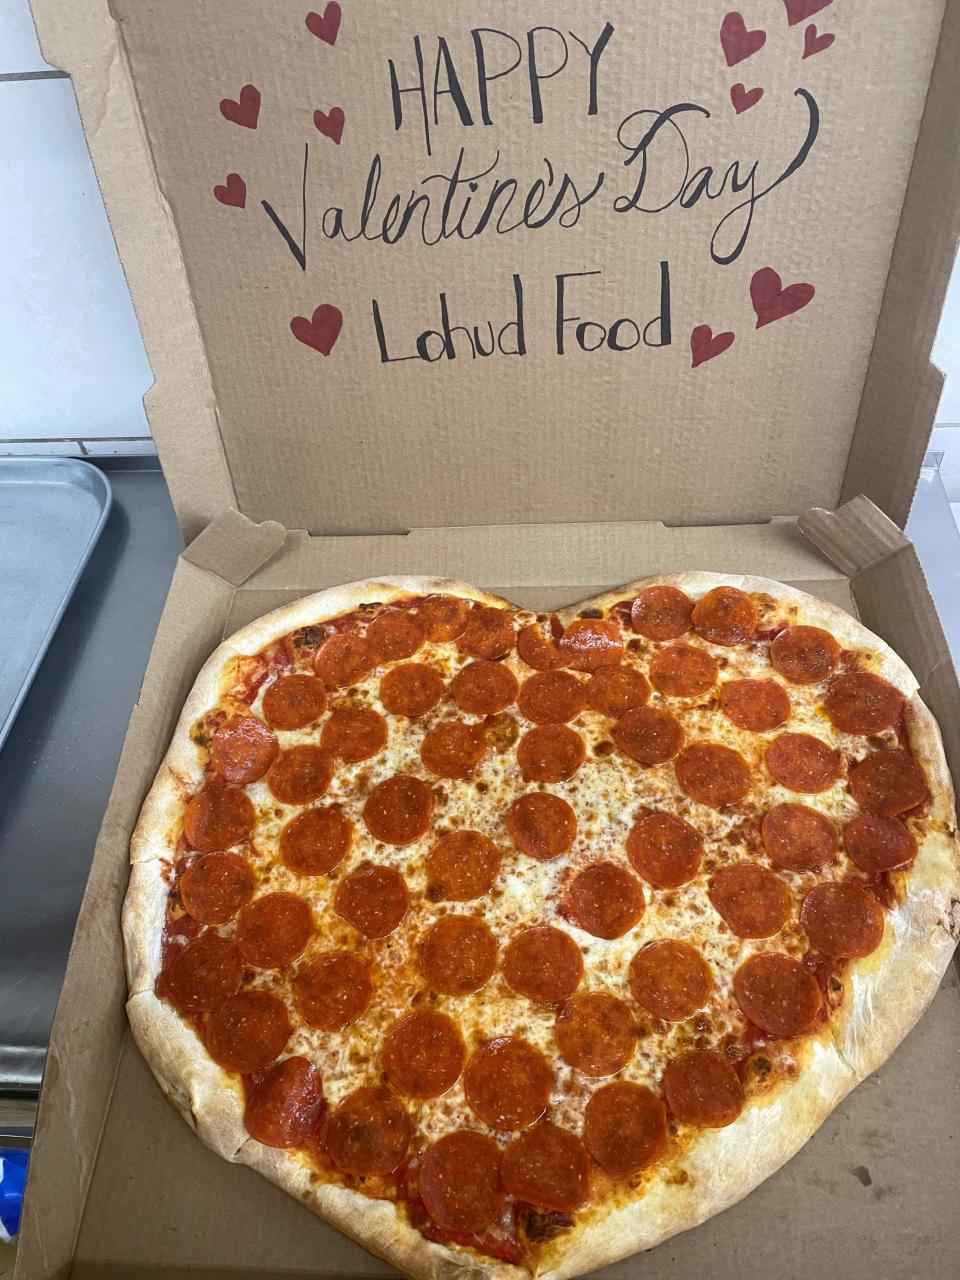 Valentine's Day box from Gino's Pizzeria in Yonkers. You need to pre-order to get the box, though the heart-shaped pizza can be ordered on Feb. 14.